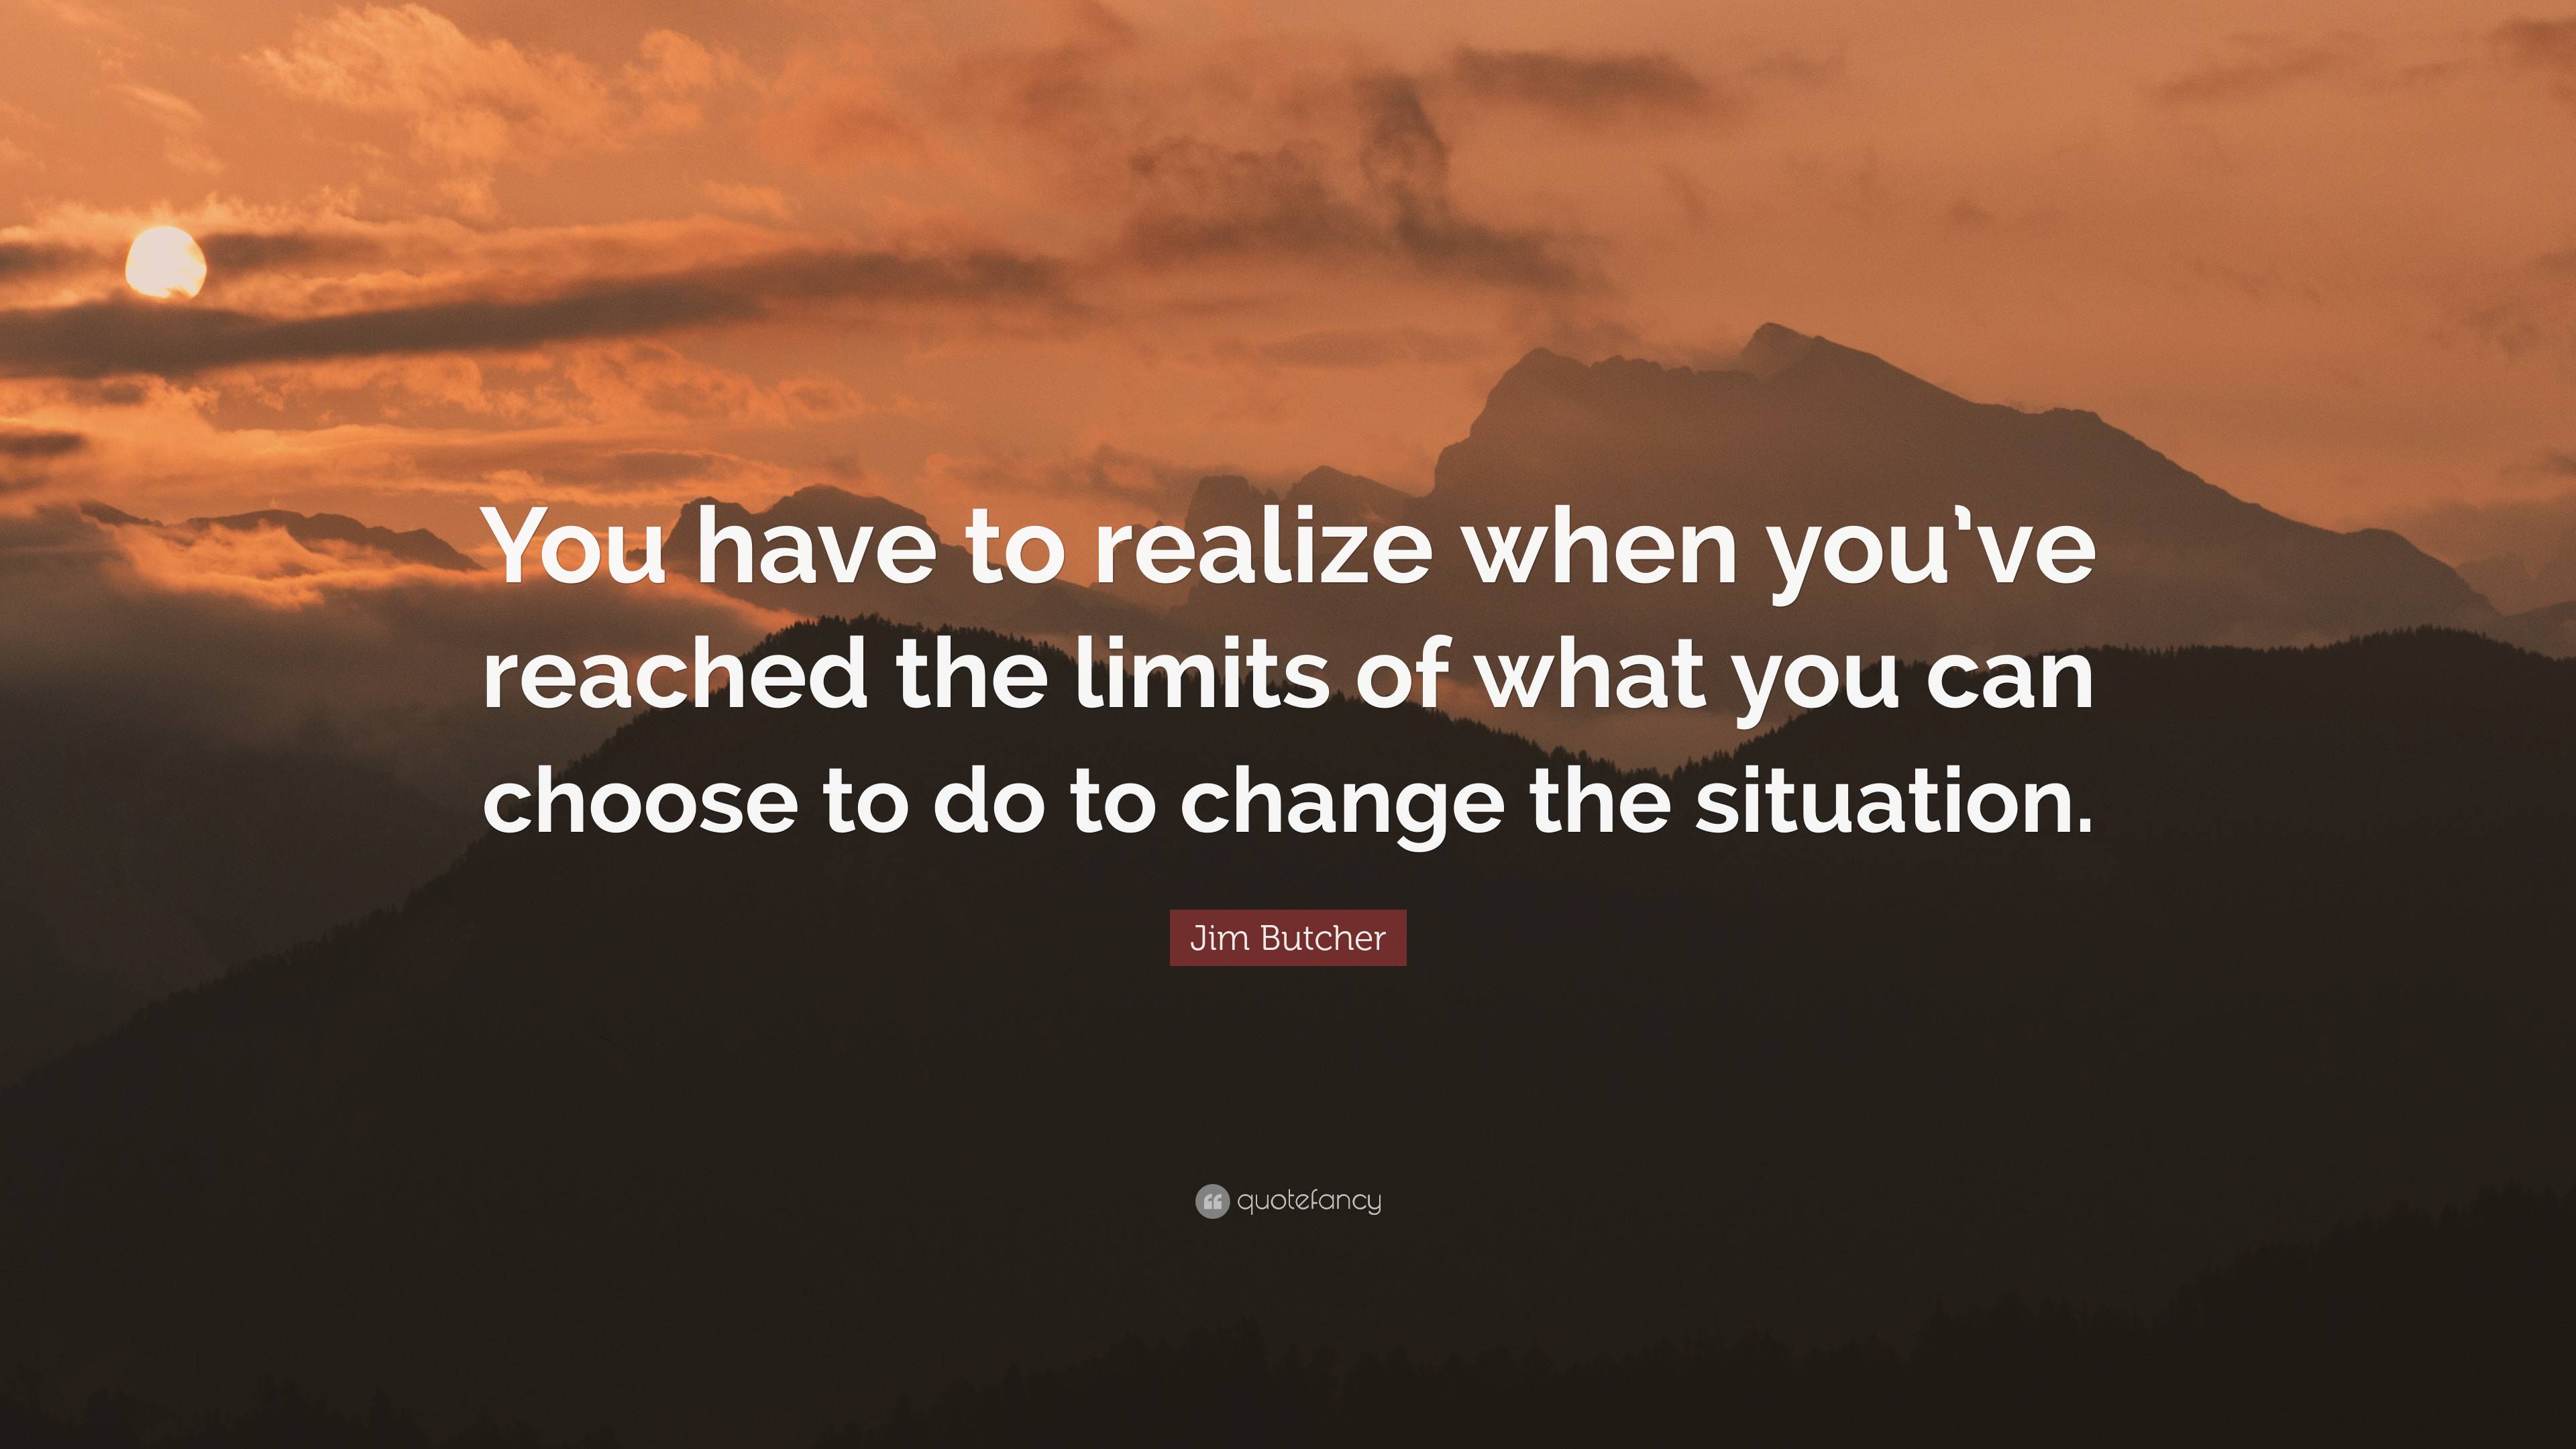 Jim Butcher Quote: “You have to realize when you’ve reached the limits ...